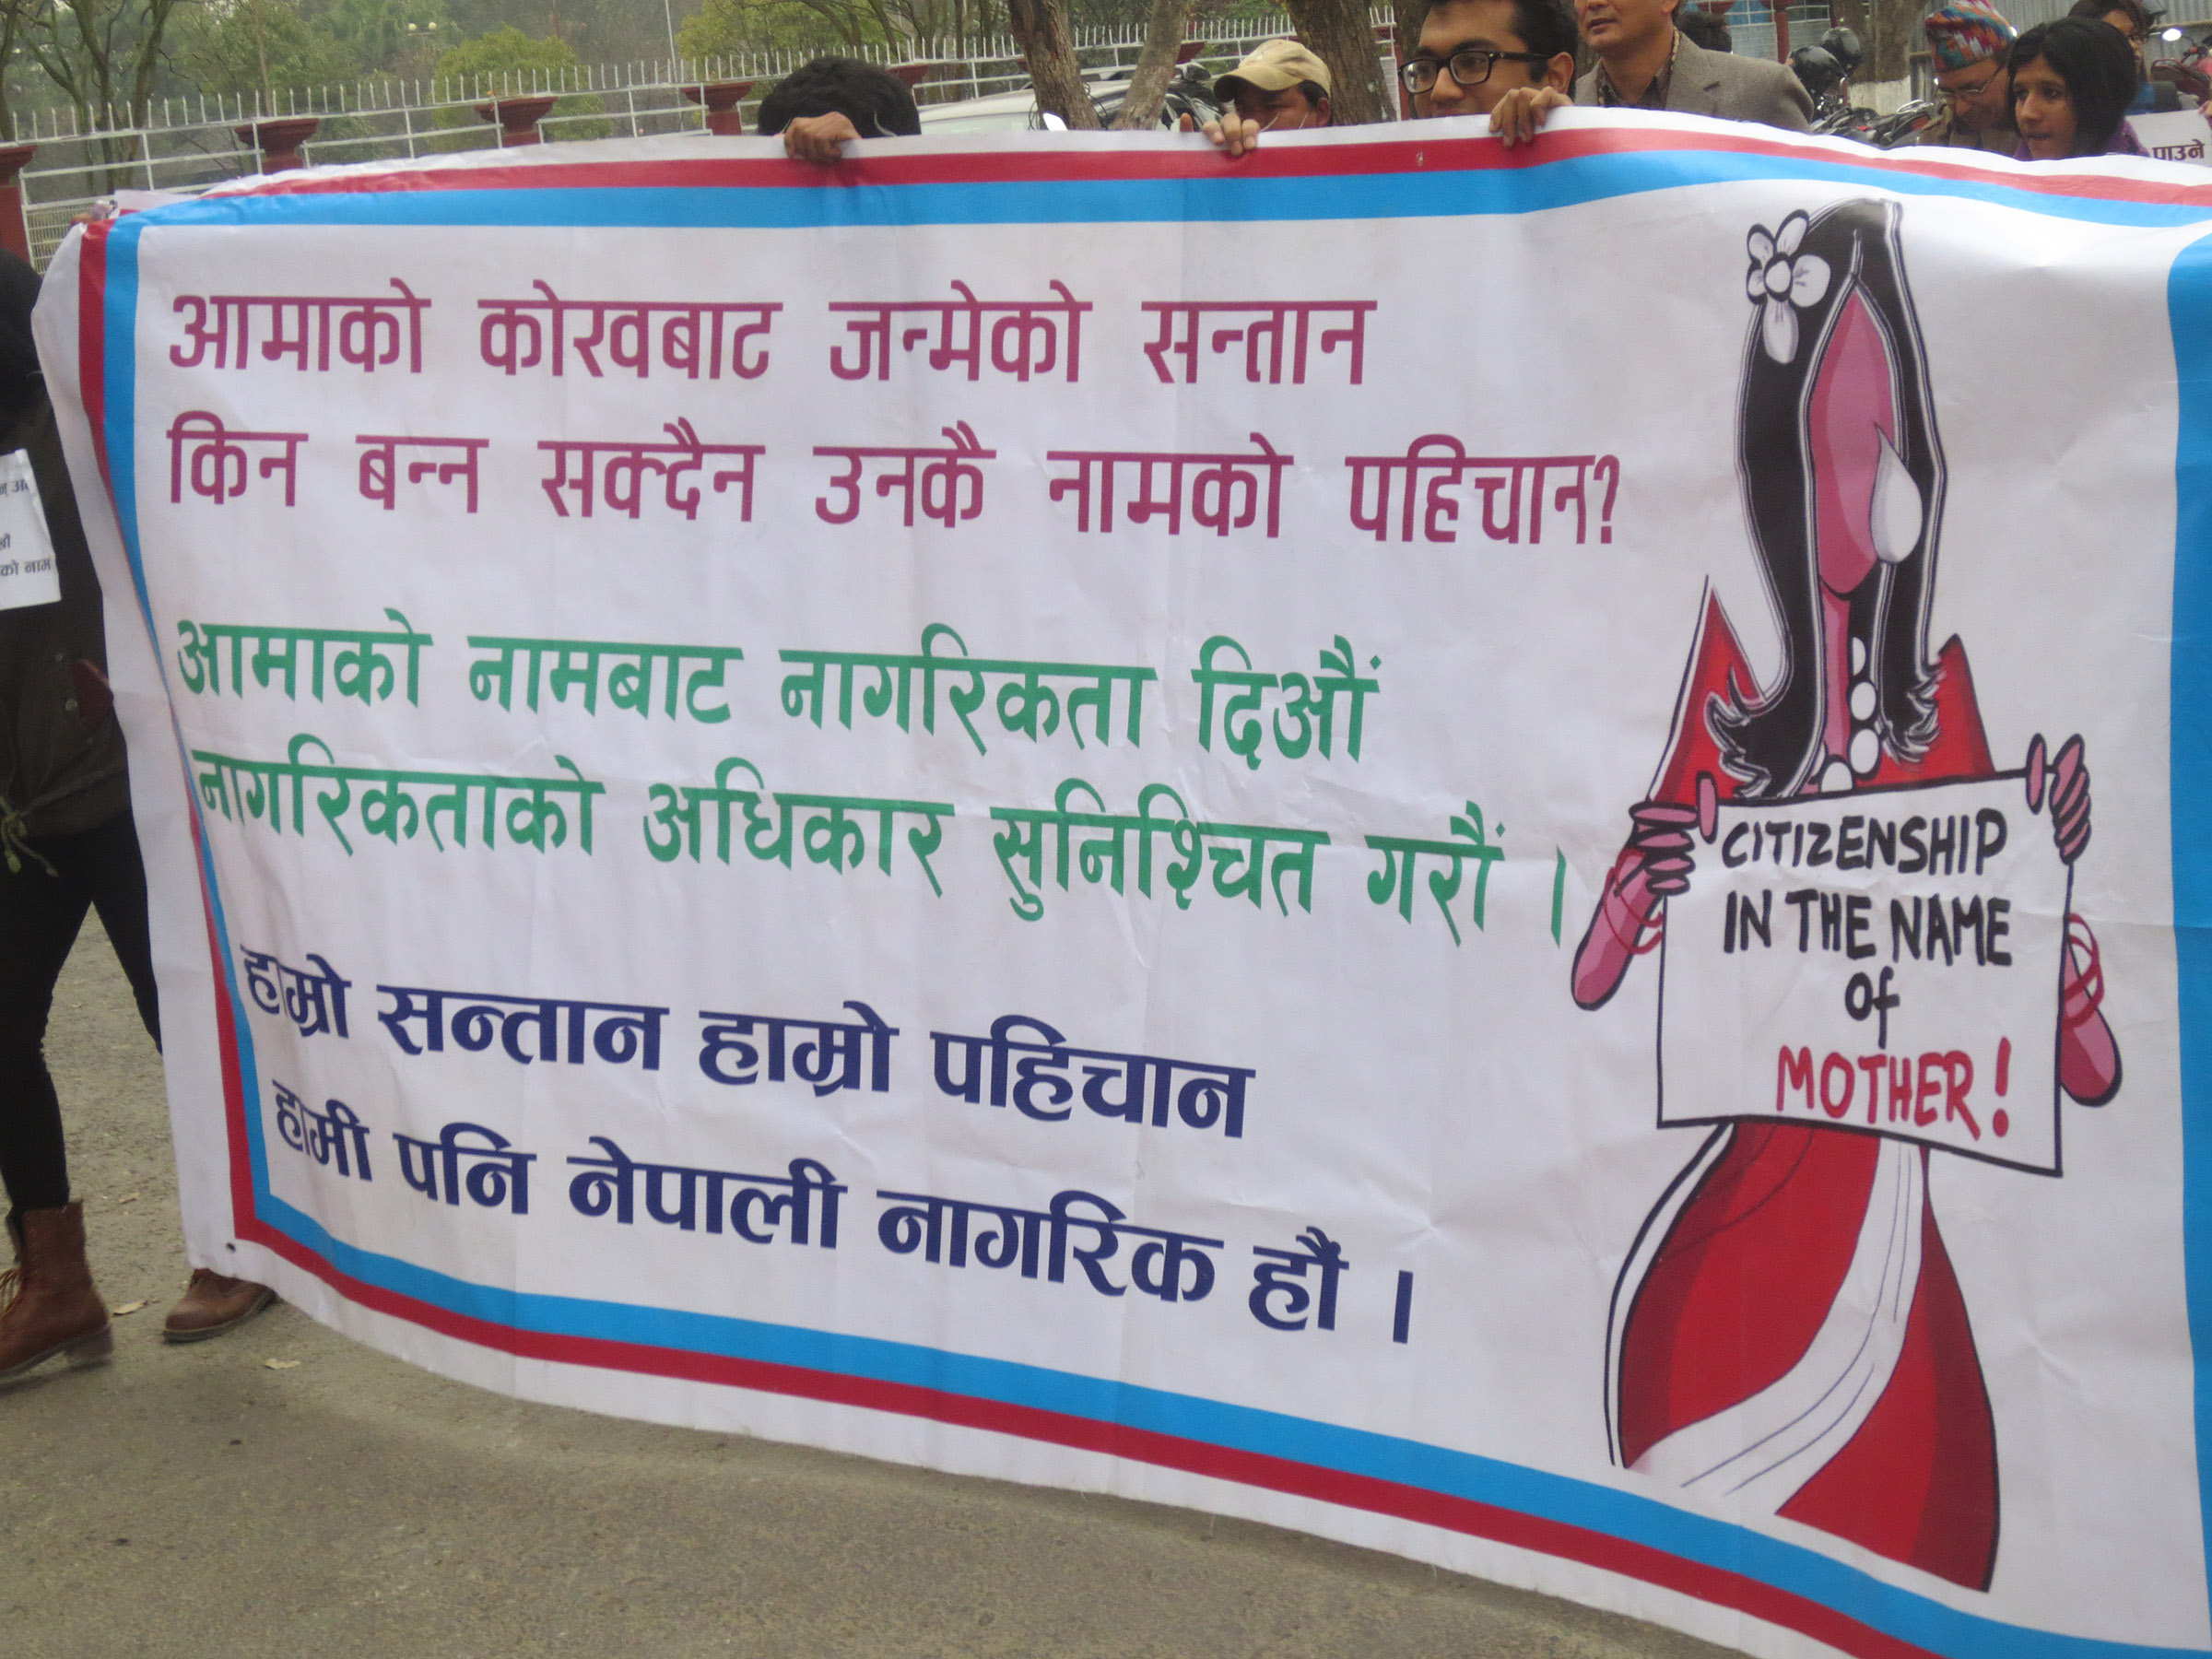 Nepali people hold a large white banner with Nepali writing on it, with the design of a woman with a tear holding a sign that says "Citizenship in the name of the Mother!"